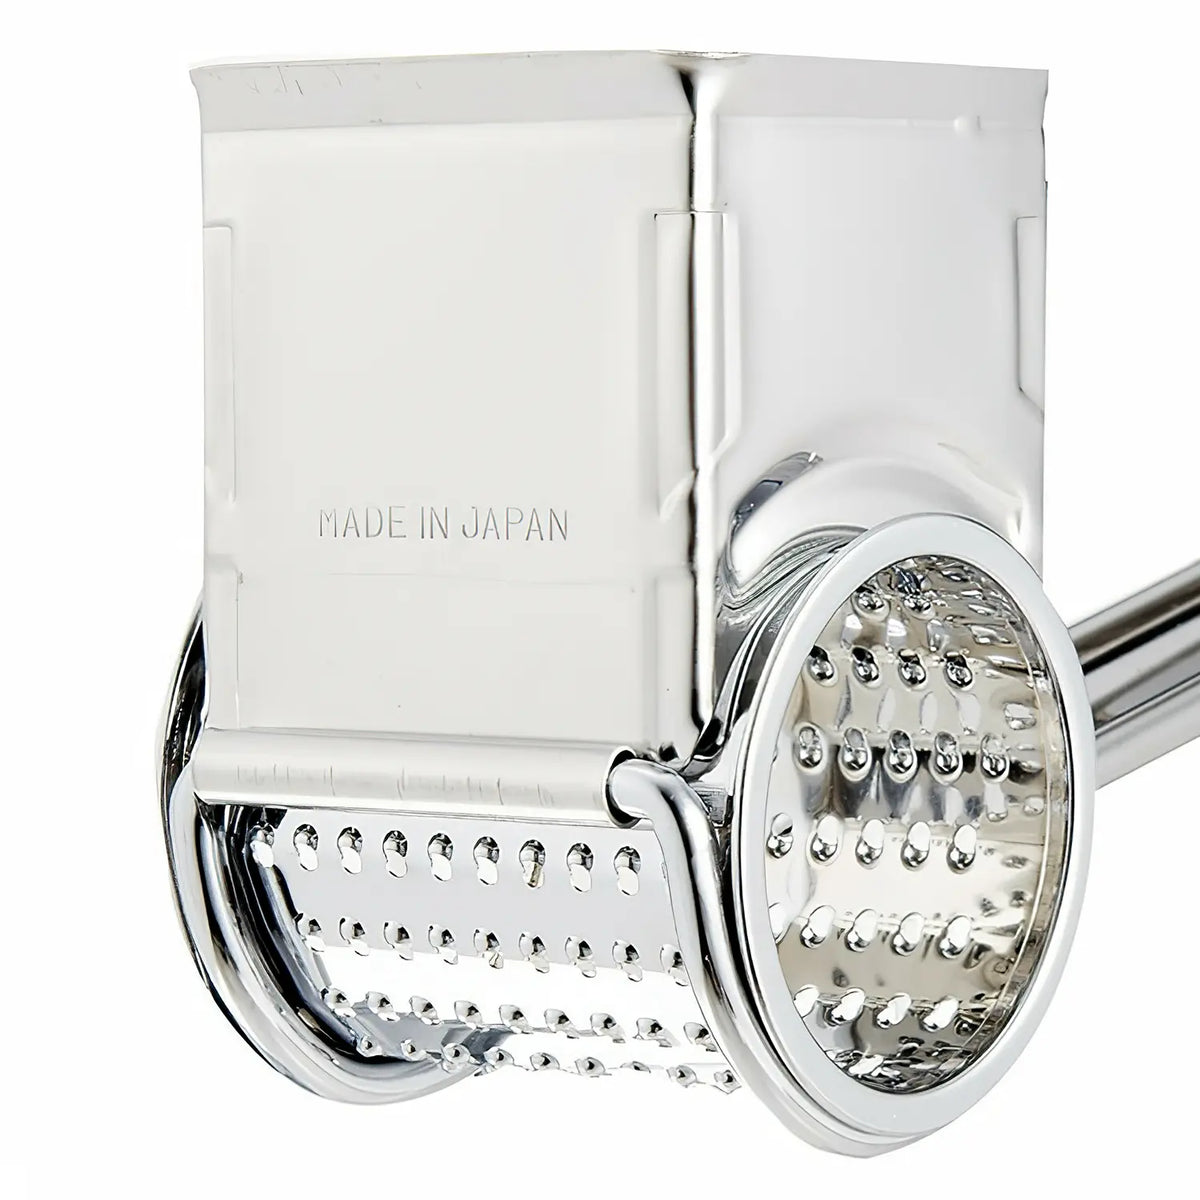 Stainless Steel Rotary Cheese Grater - Brilliant Promos - Be Brilliant!